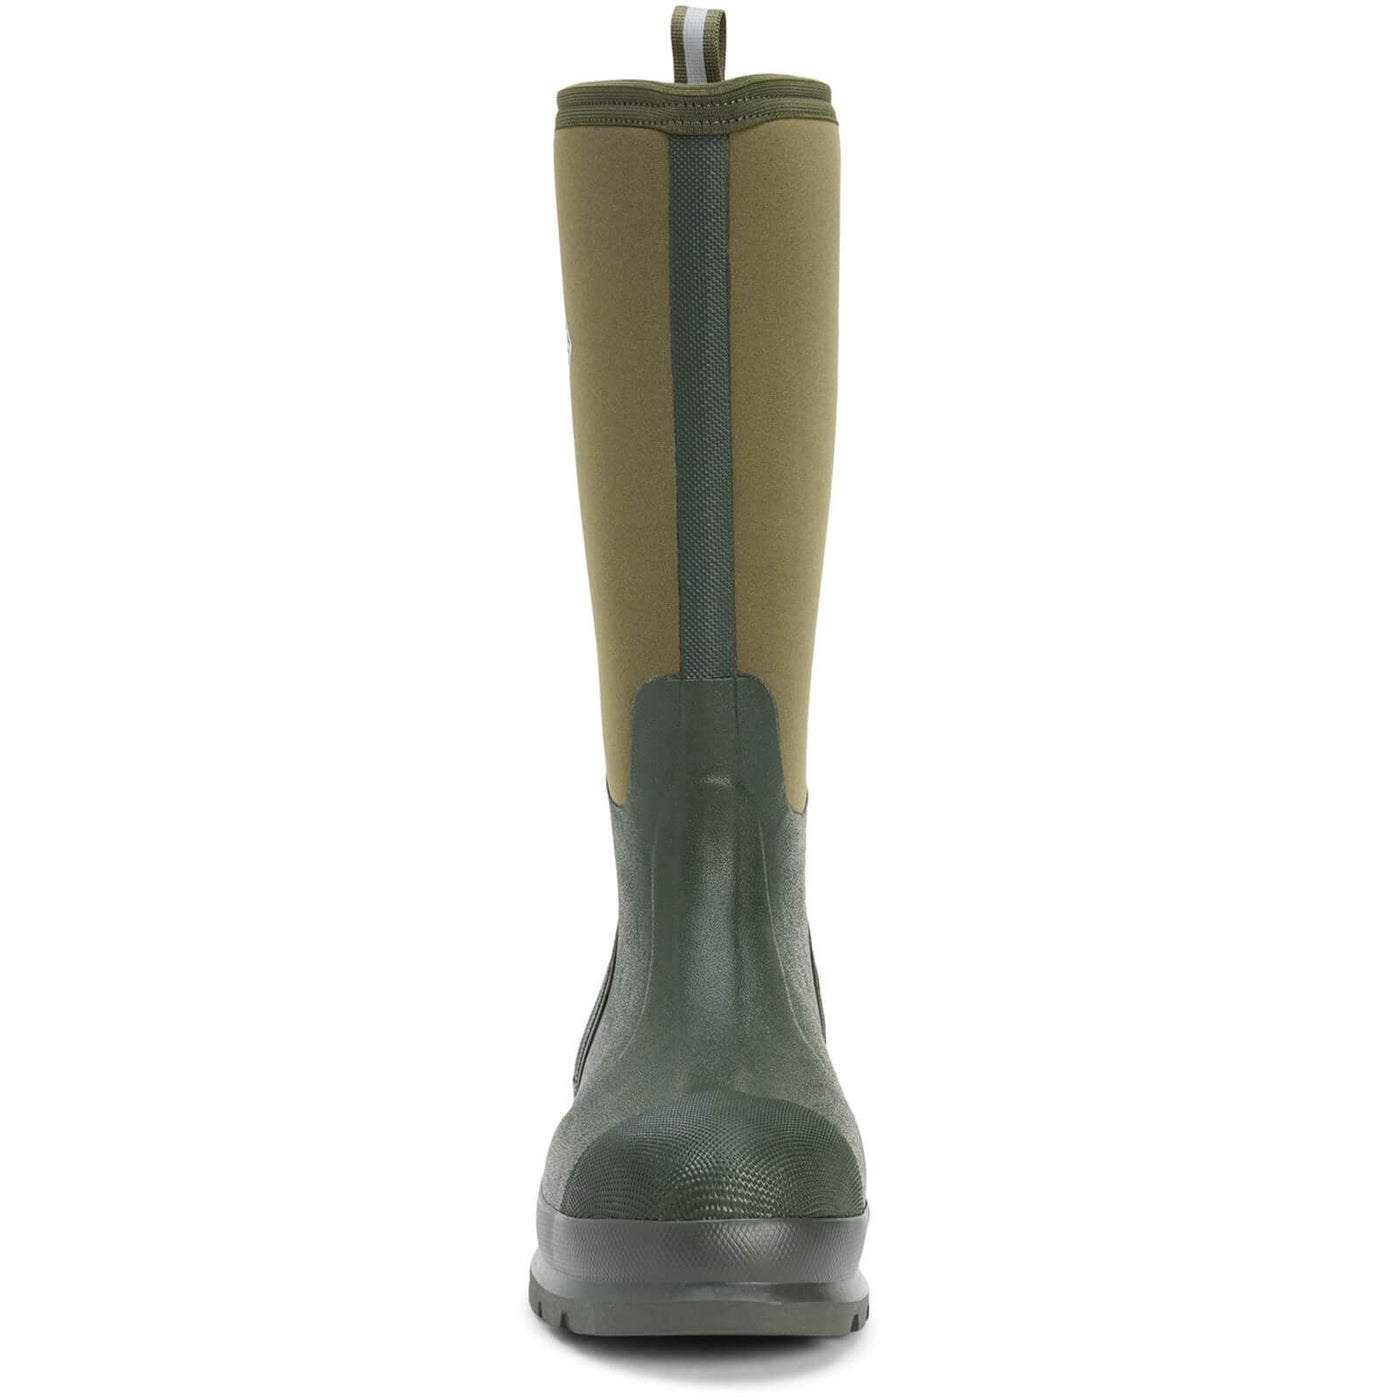 Muck Boots Chore Classic Hi Patterned Wellies Moss 3#colour_moss-army-green